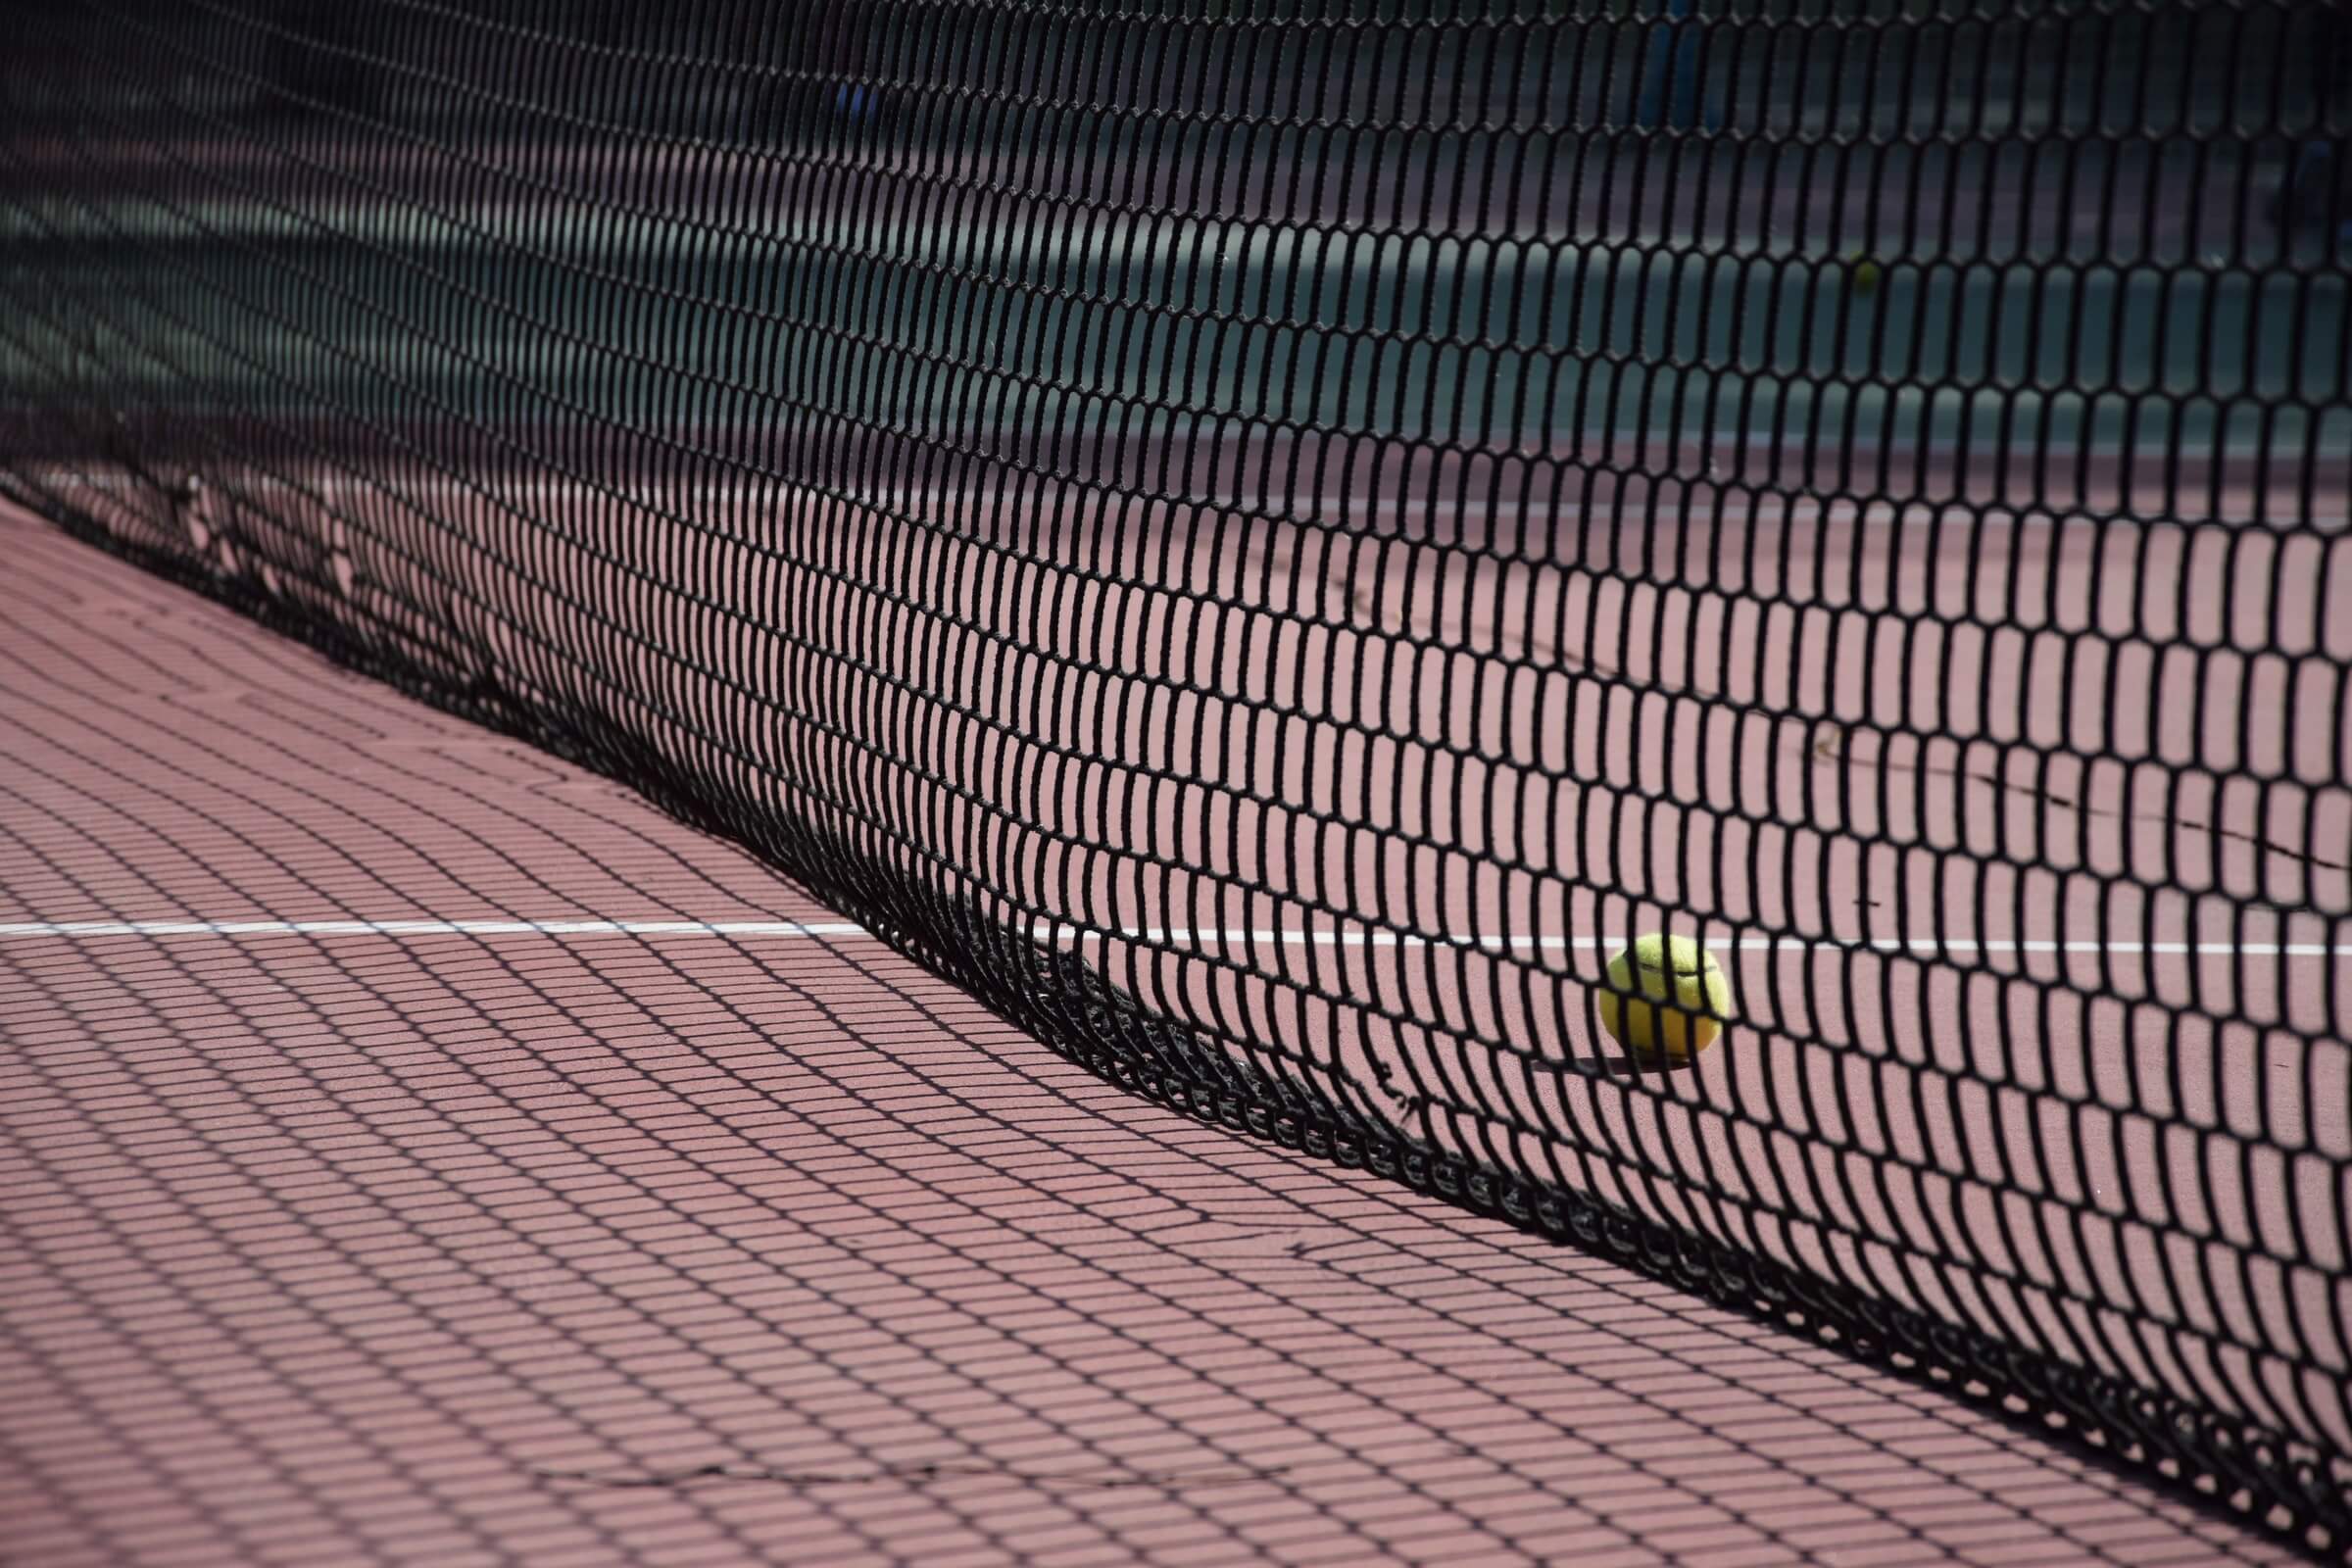 Tennis netting casting shadows over red tennis court